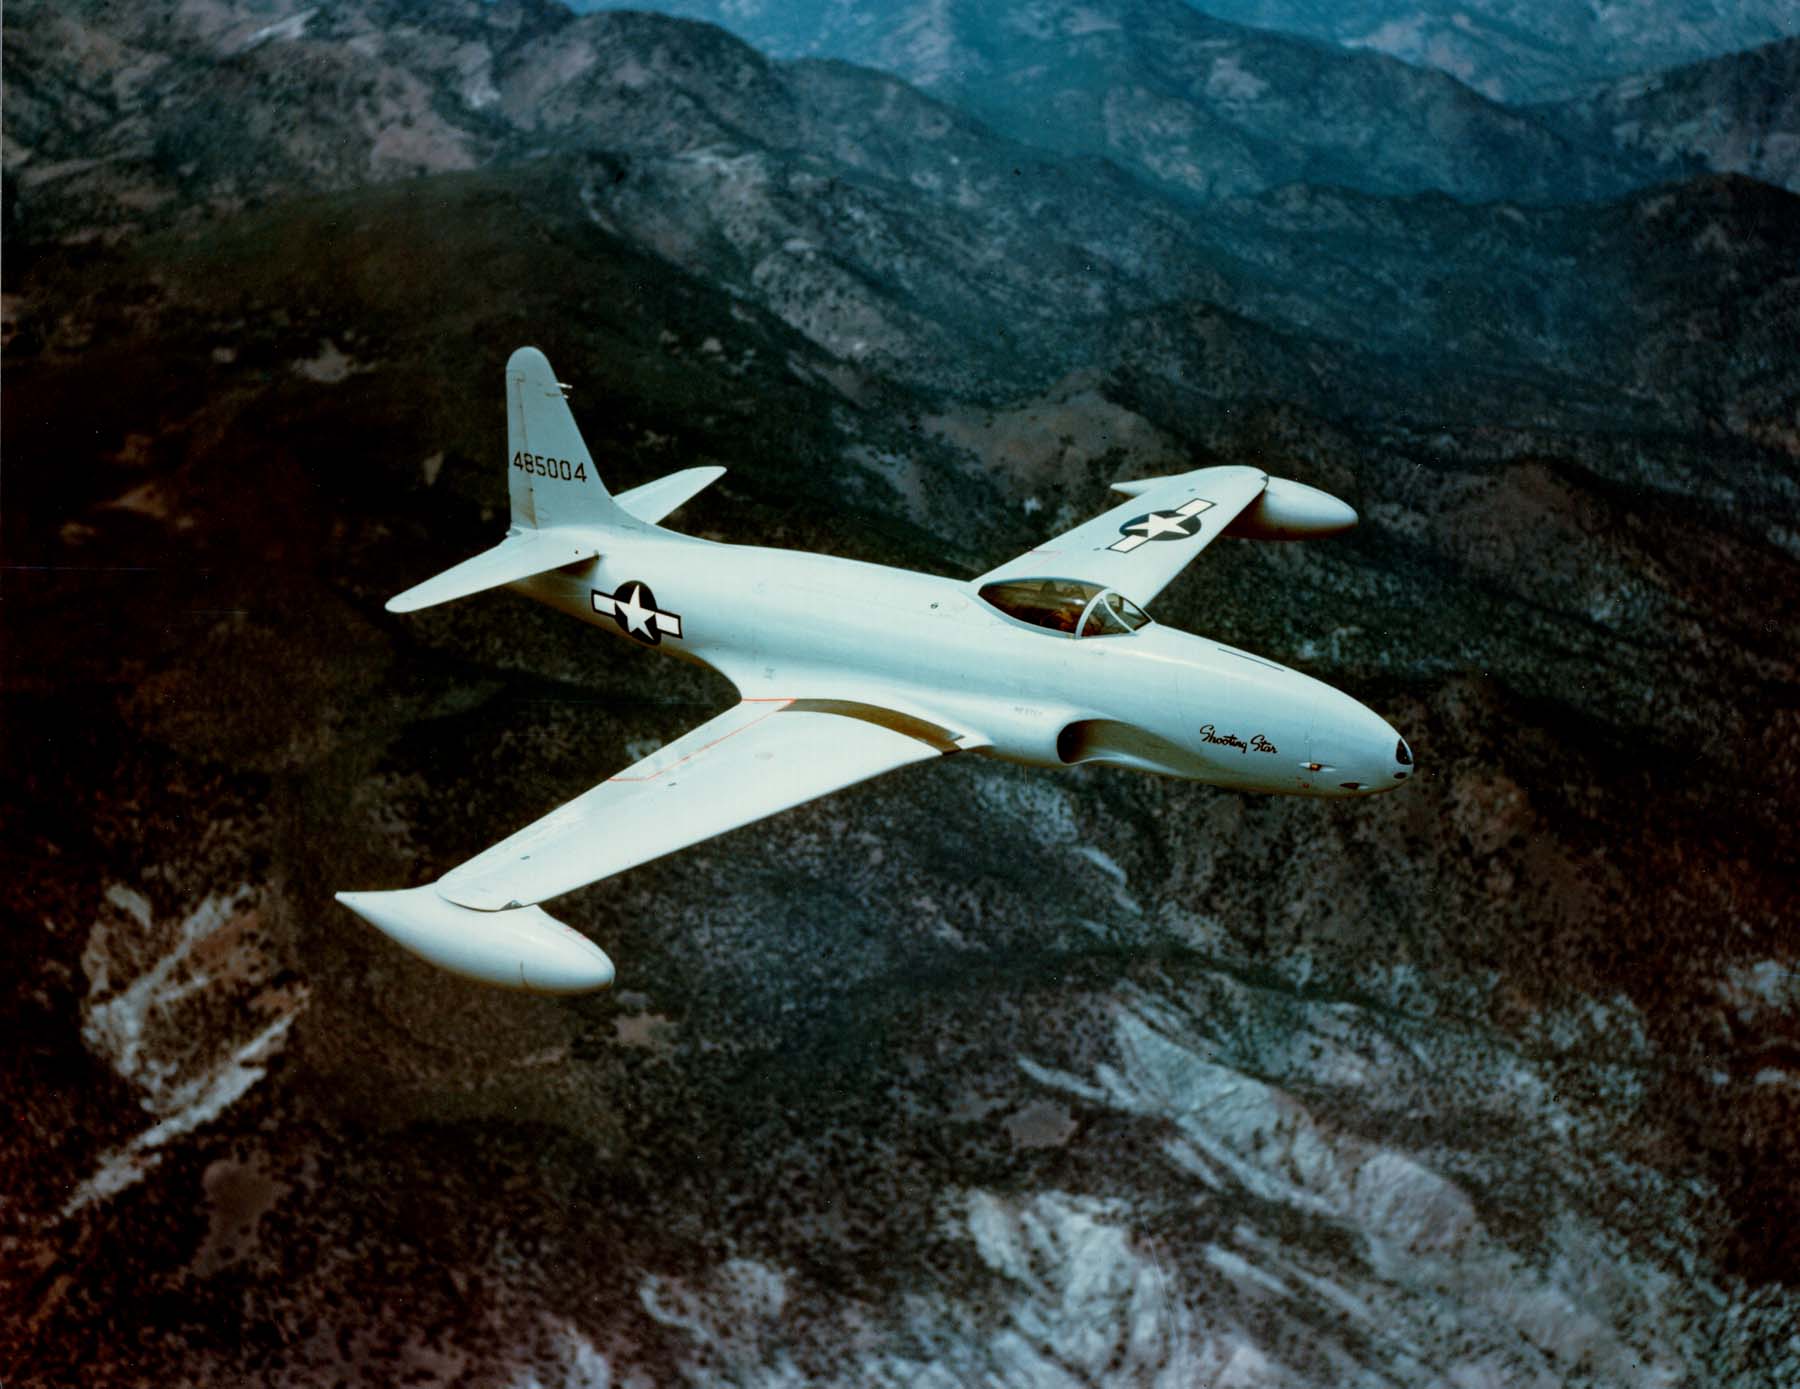 Lockheed P-80A-1-LO shooting Star 44-85004, similar to the fighter being test flown by Richard I. Bong, 6 August 1945. (U.S. Air Force) 